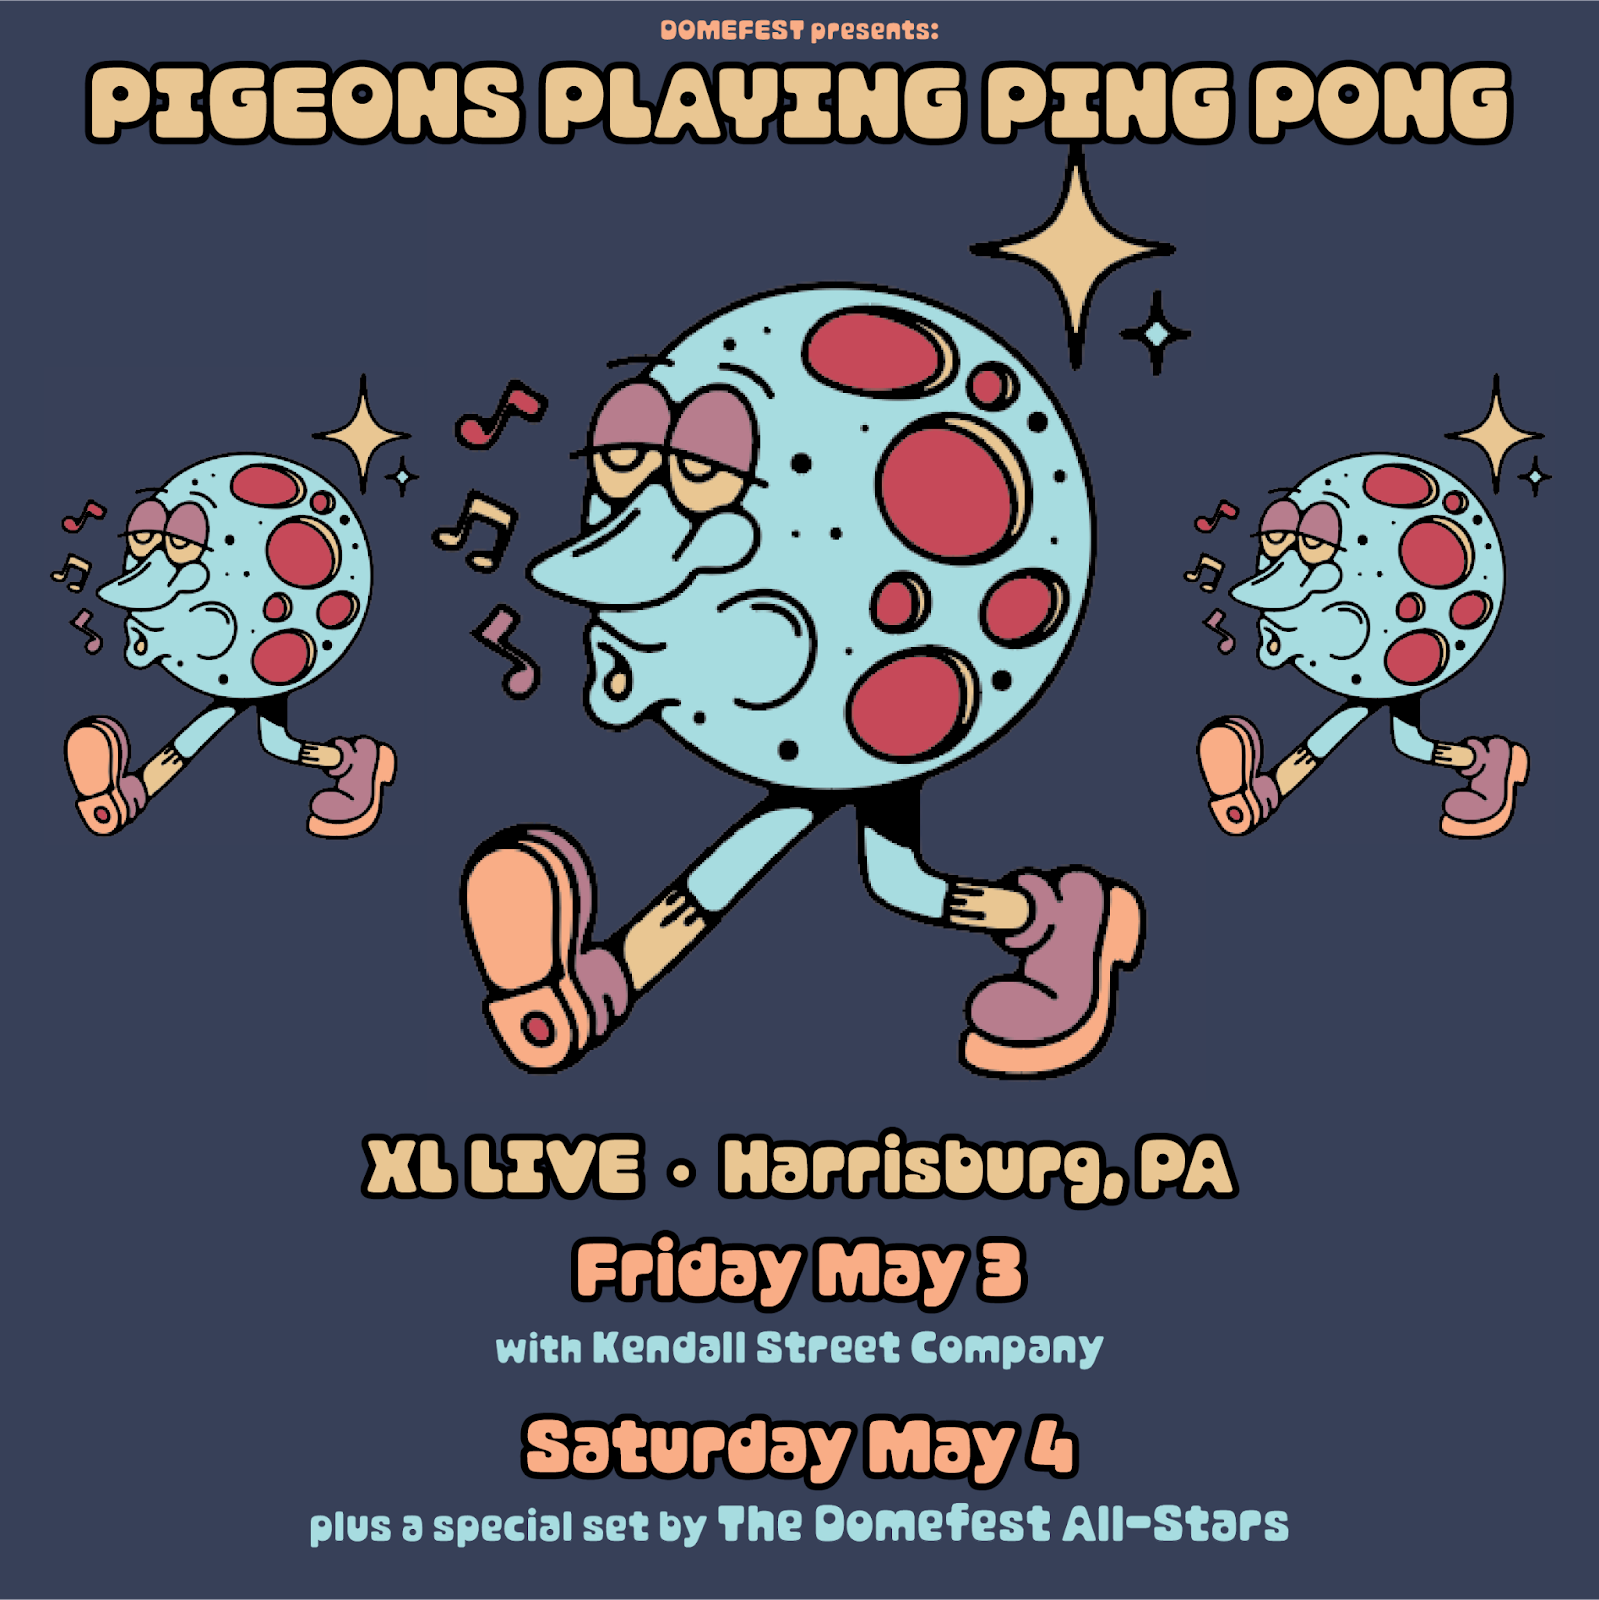 PIGEONS PLAYING PING PONG ANNOUNCES TWO-NIGHT RUN IN HARRISBURG, PA